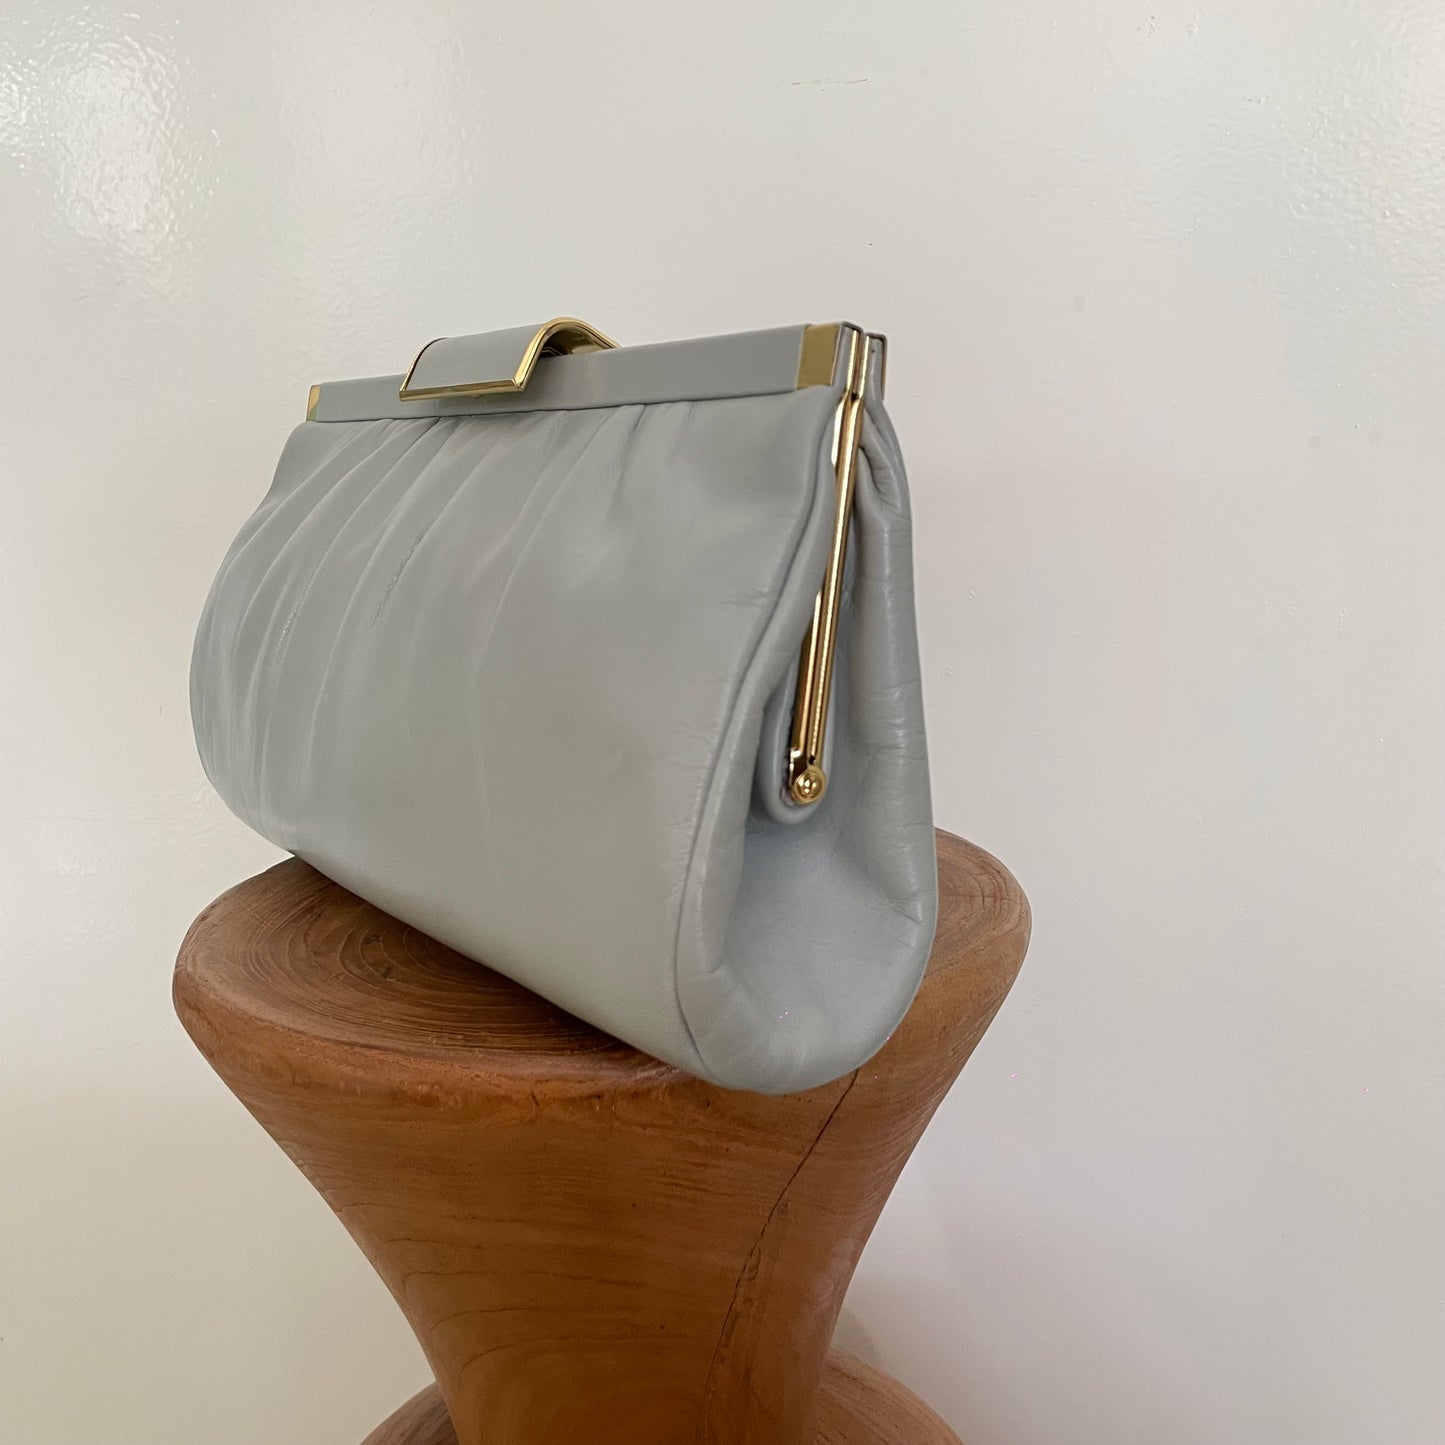 Vintage 1980s Grey leather clutch Signed Faigen made in Australia